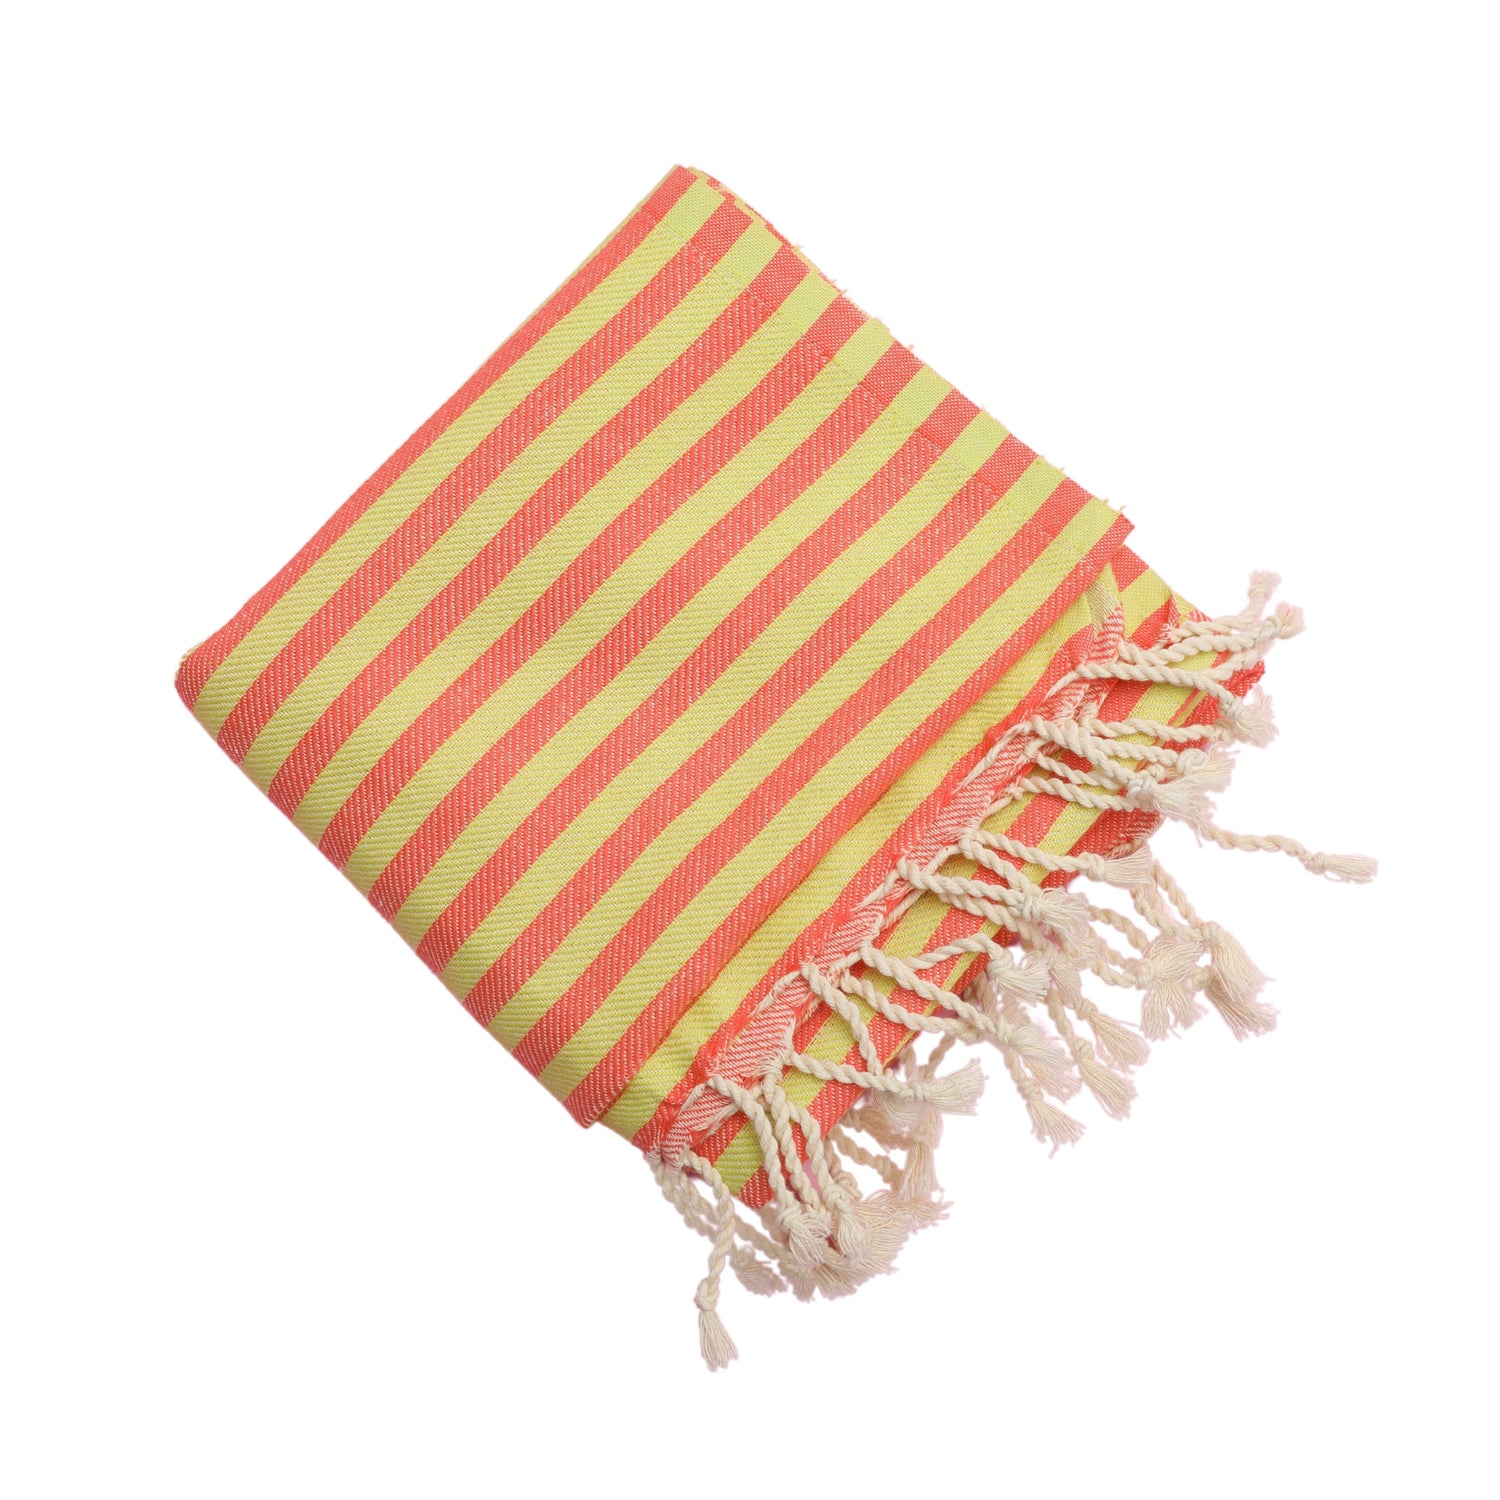 Experience Luxury with Superior Quality Bulk Turkish Towels. Buy on Sale online bulk towels in USA, US.